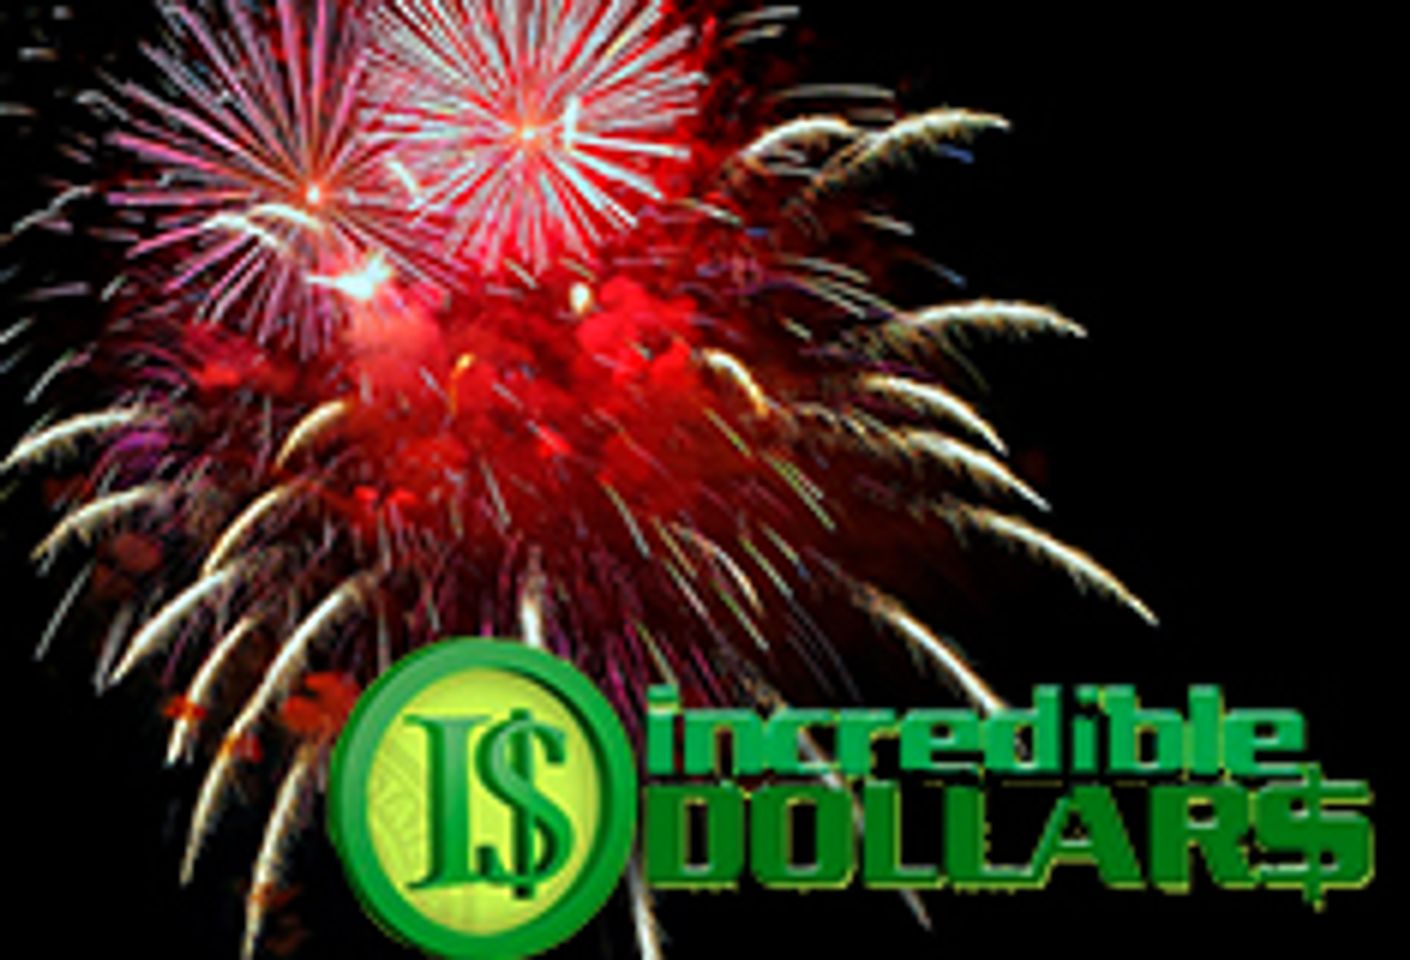 IncredibleDollars Offers Fourth of July Promotion